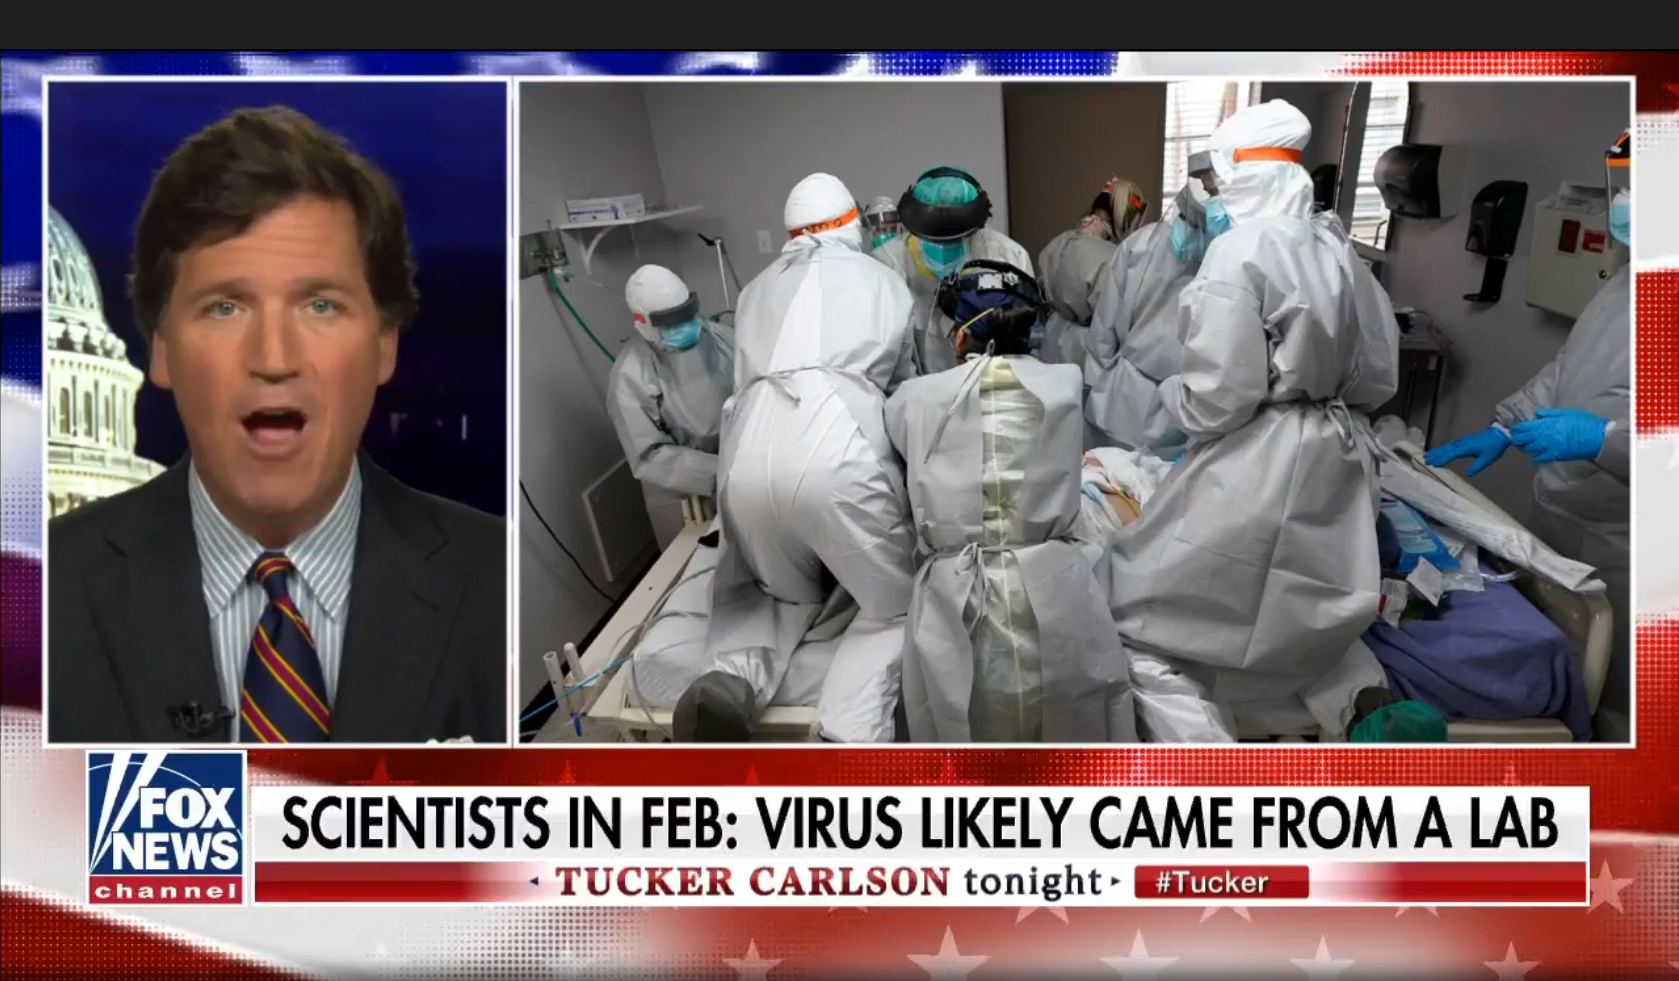 Fox: Scientists in Feb: Virus Likely Came From a Lab